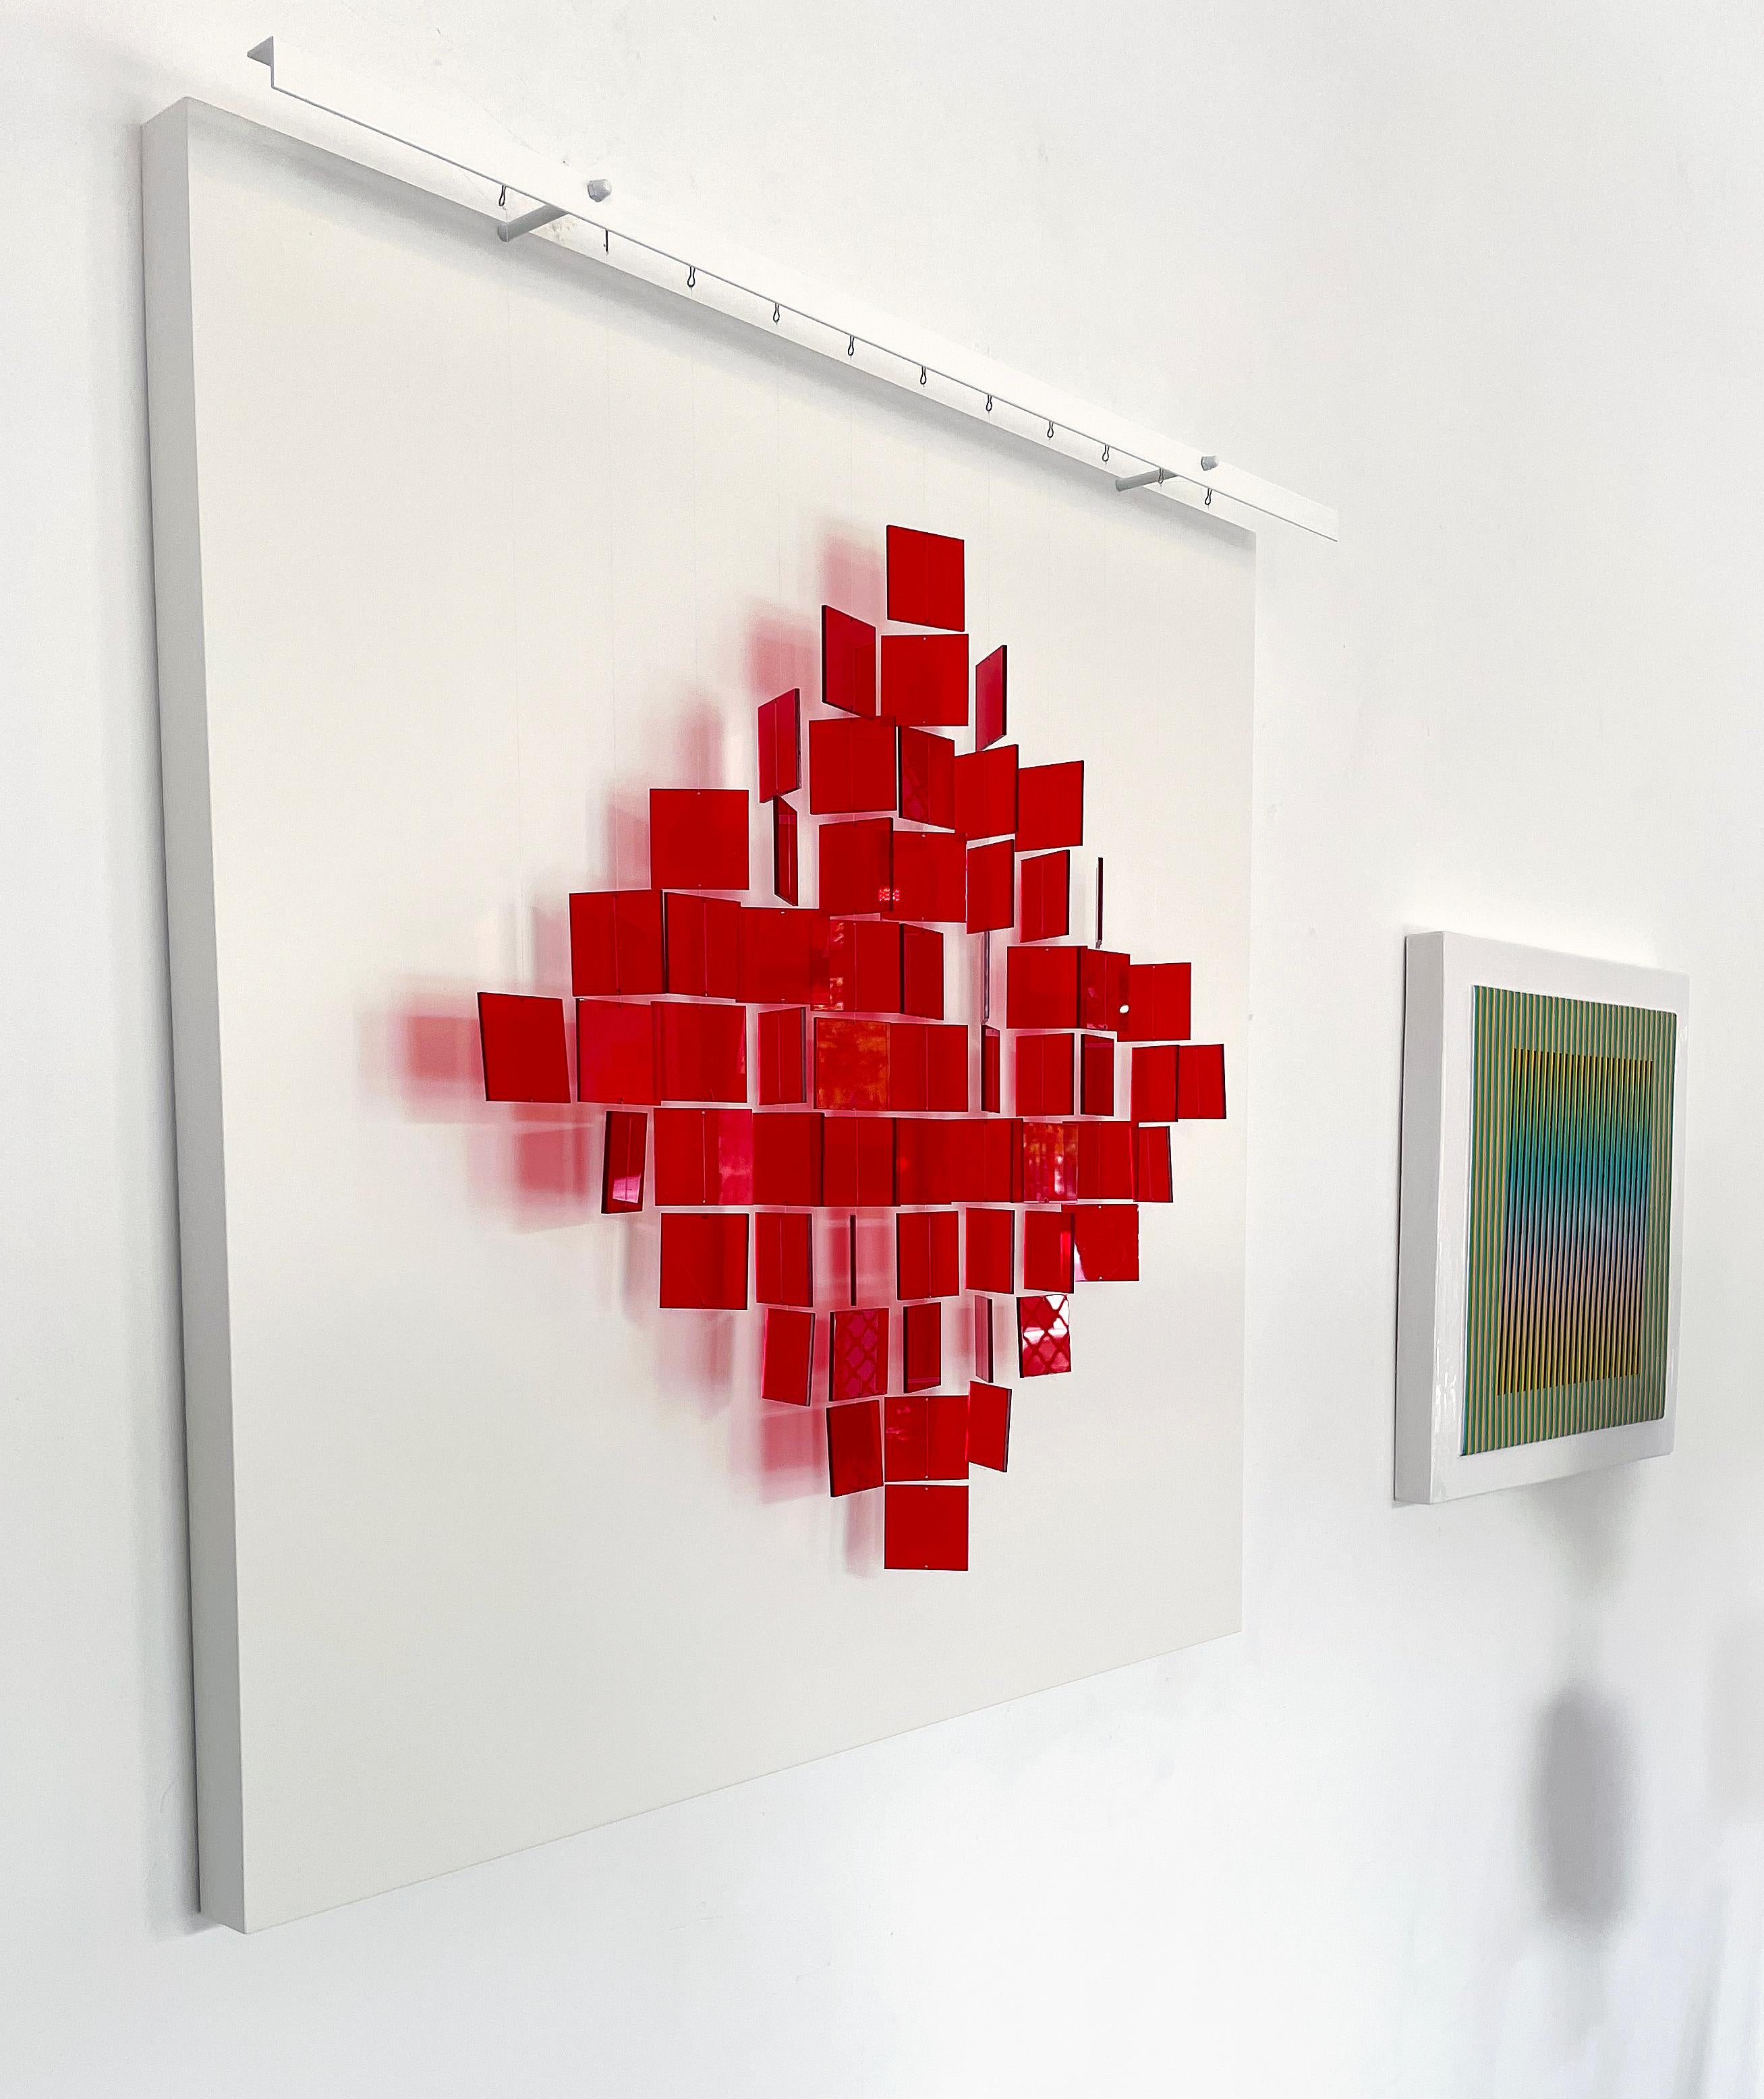 Mobile Losange Rouge - Kinetic Mixed Media Art by Julio Leparc